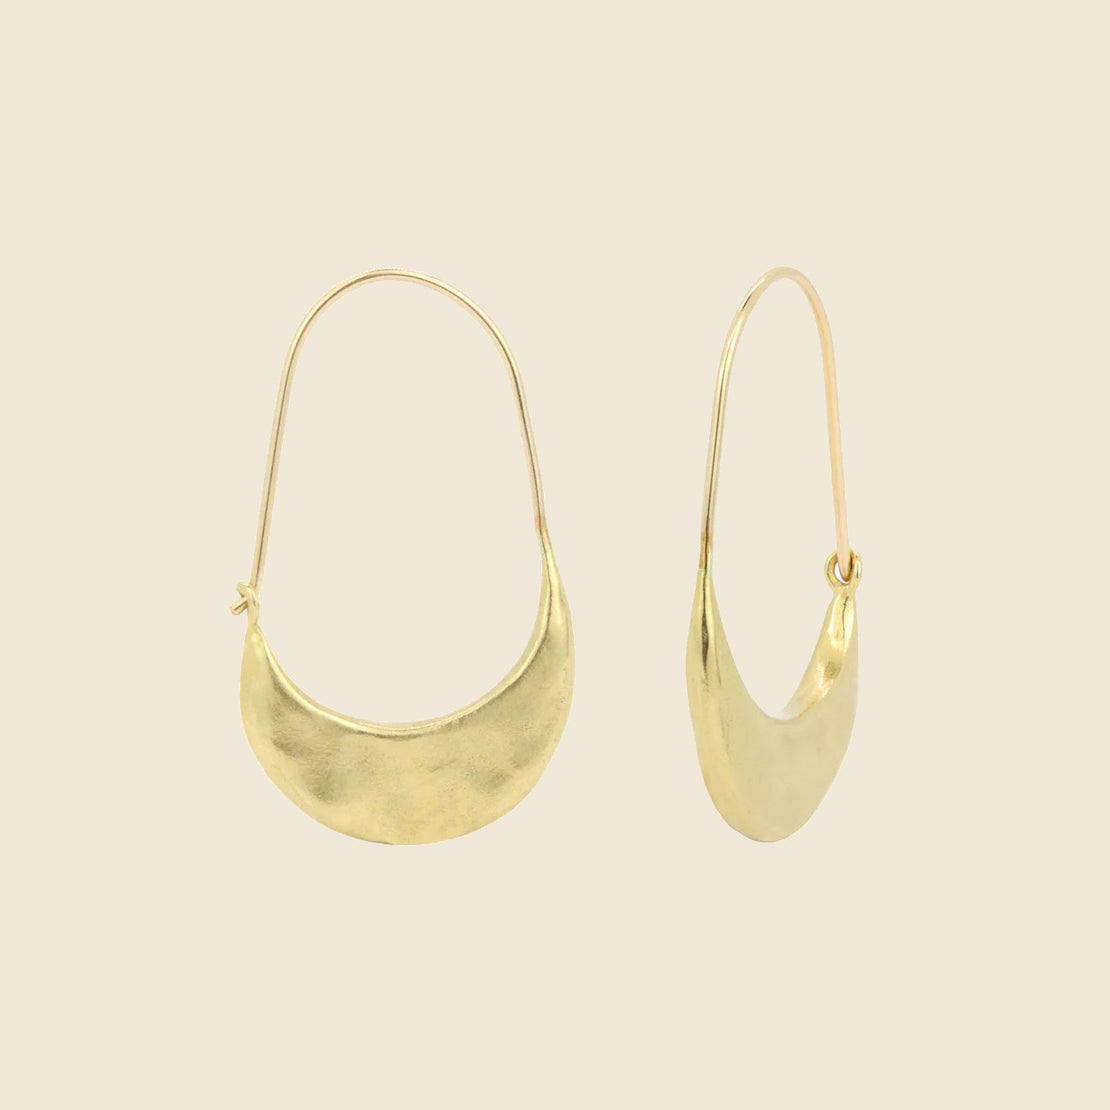 Muse Hoops - Bronze - Amanda Hunt - STAG Provisions - W - Accessories - Earrings